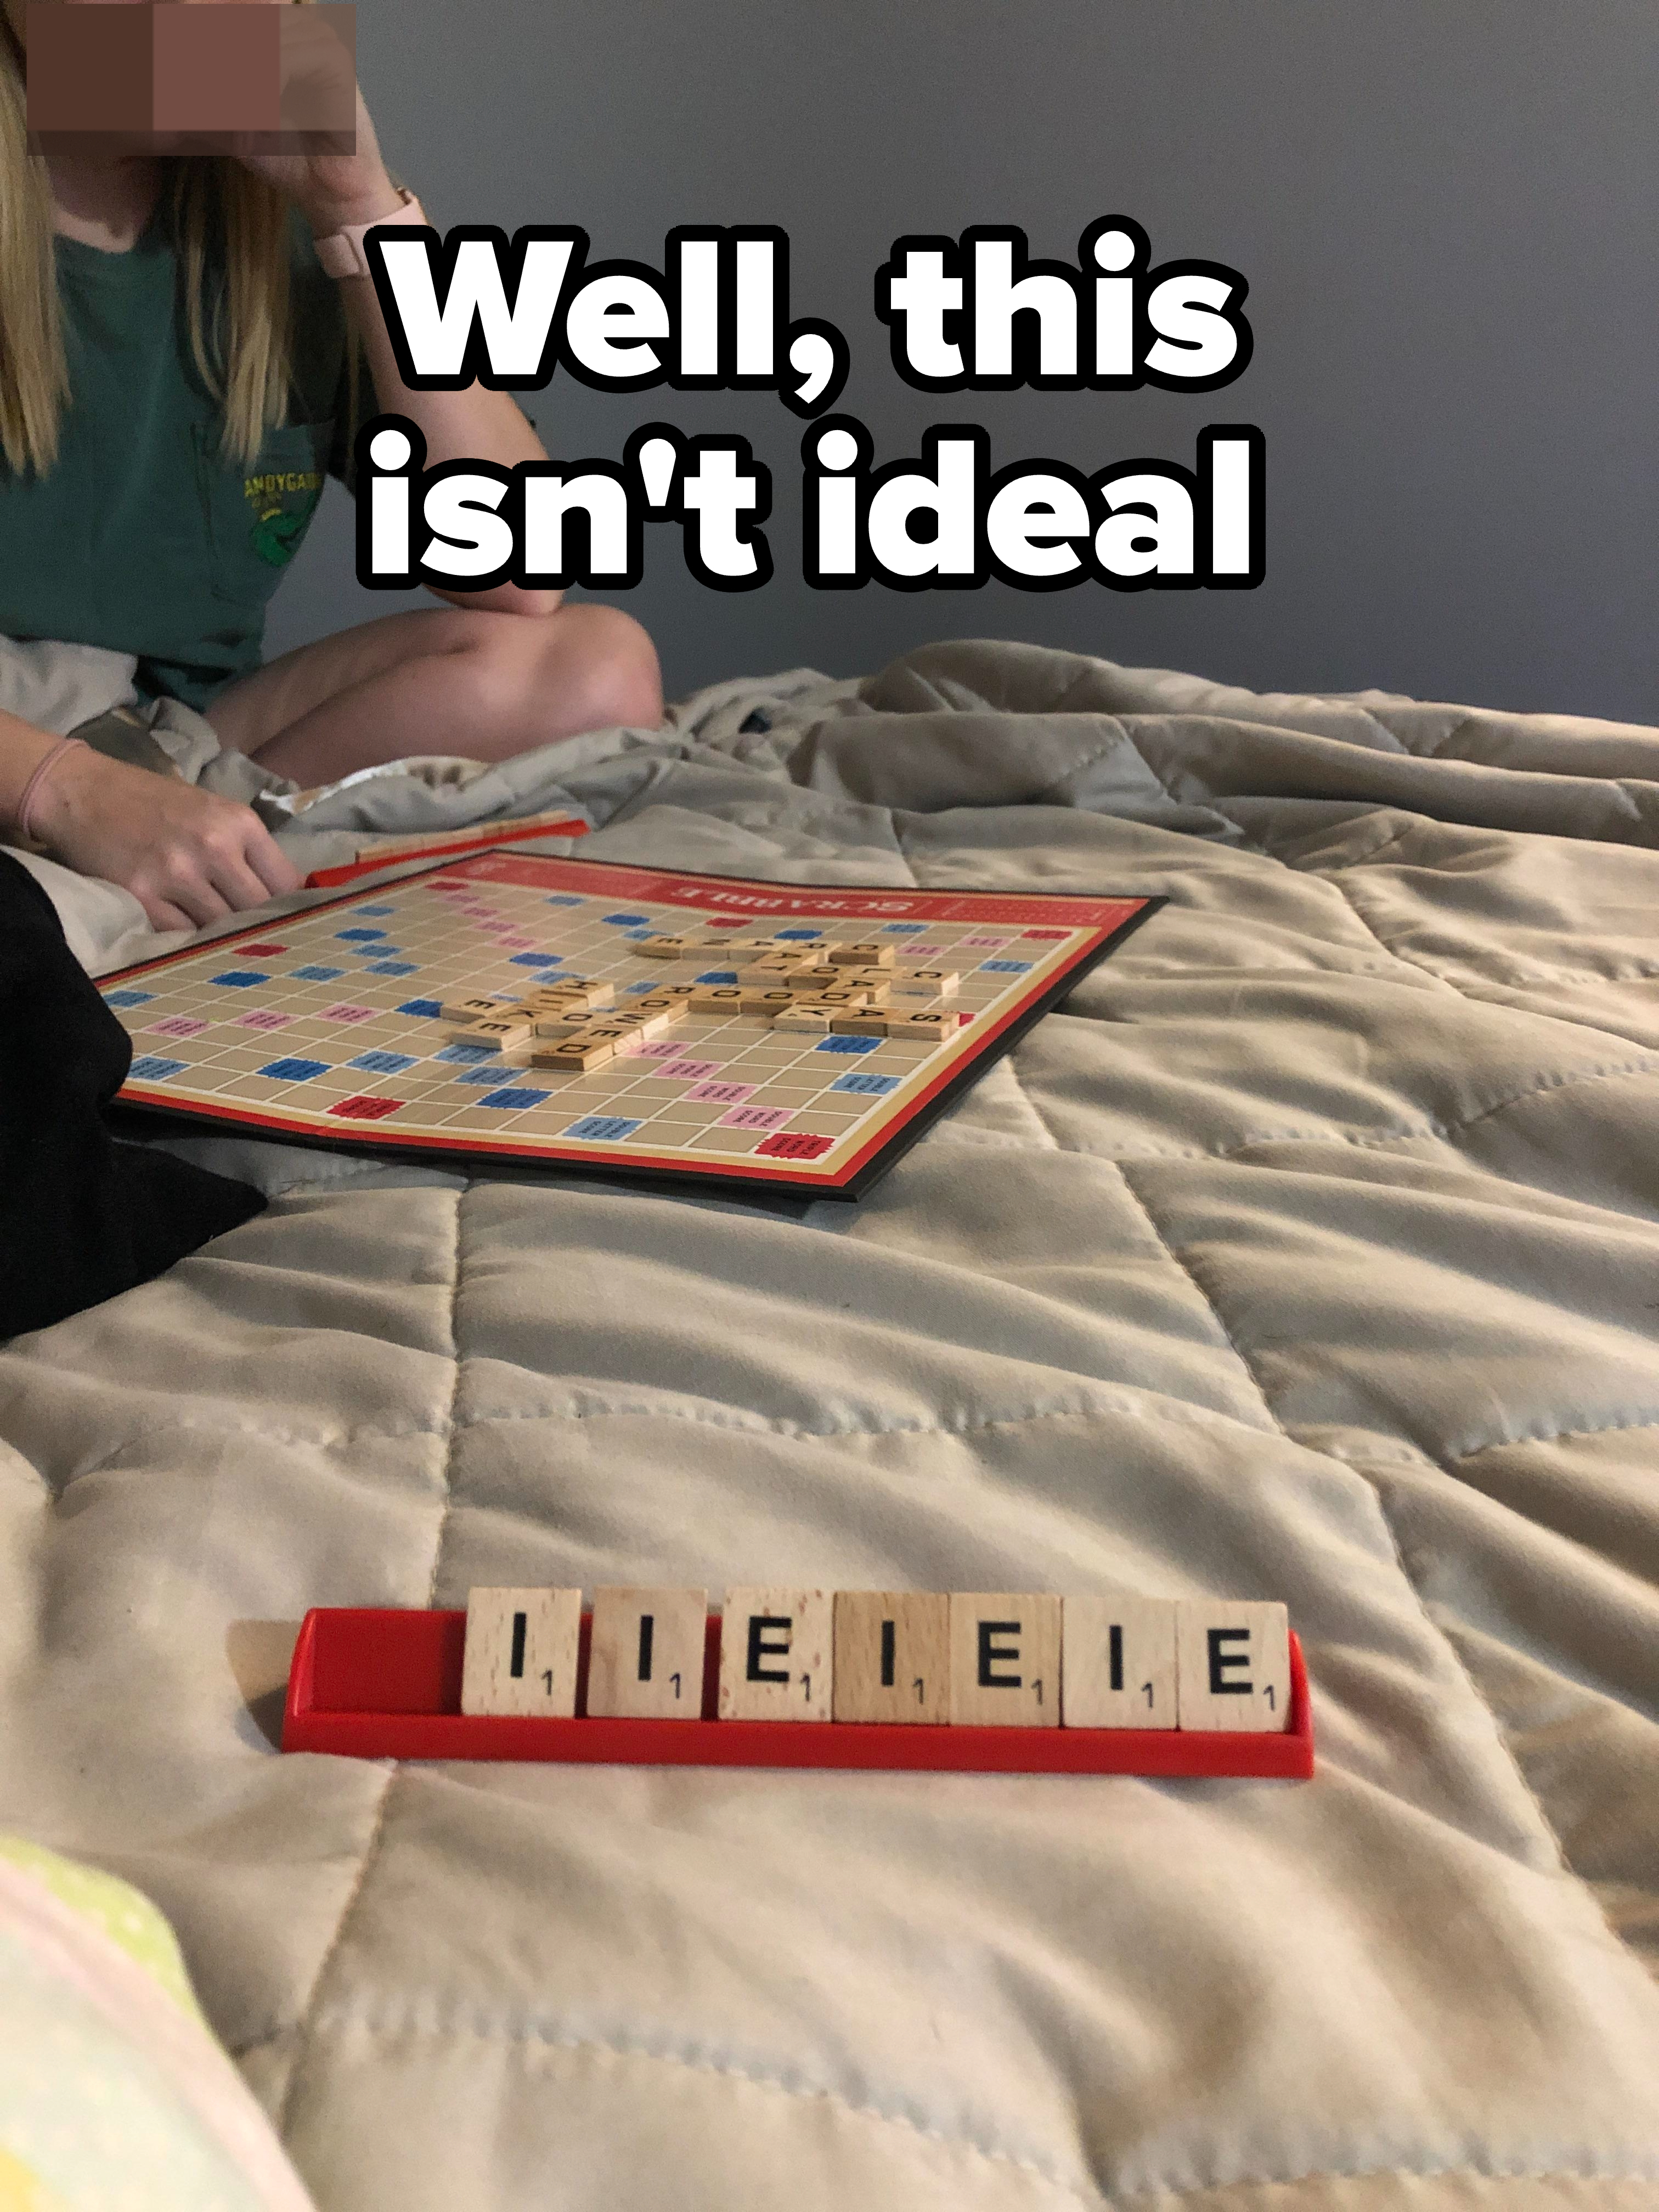 A person playing Scrabble with these letters: &quot;IIEIEIE,&quot; each worth 1 point